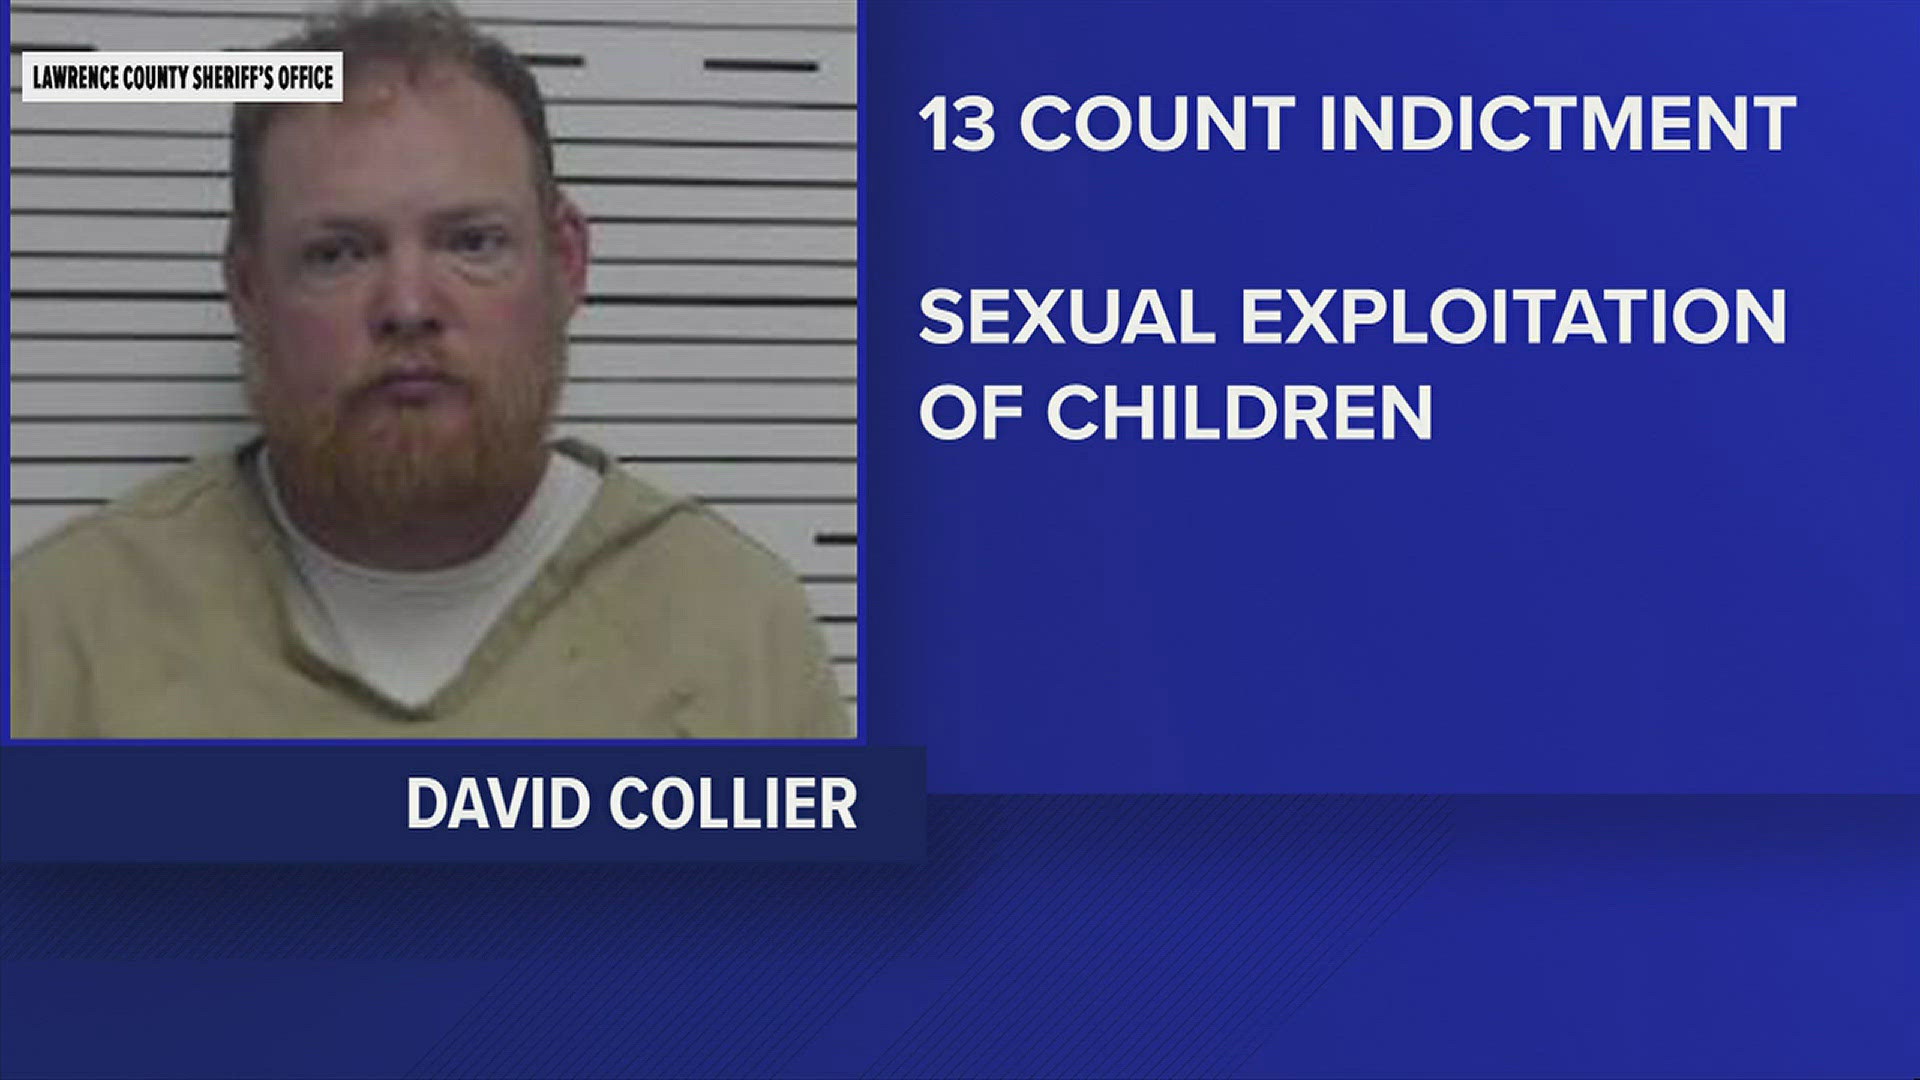 David Collier is charged with 'sexploitation' of children.